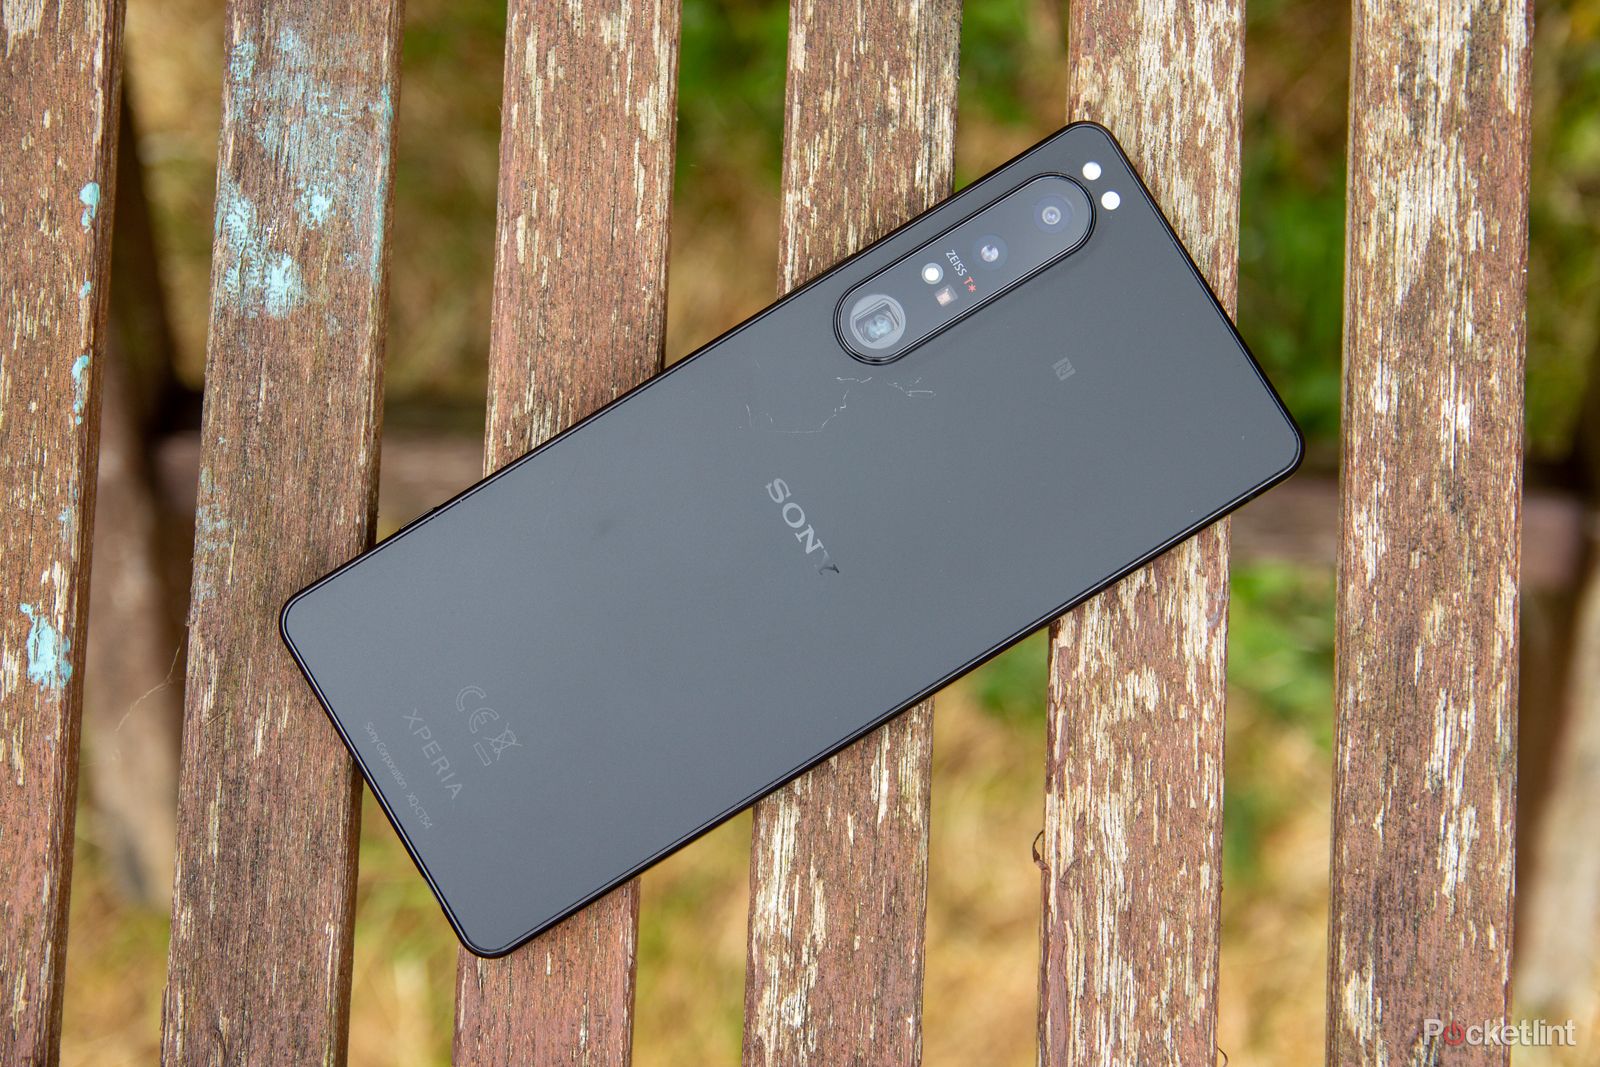 Why does Sony list IP65 and IP68 for its Xperia smartphones?